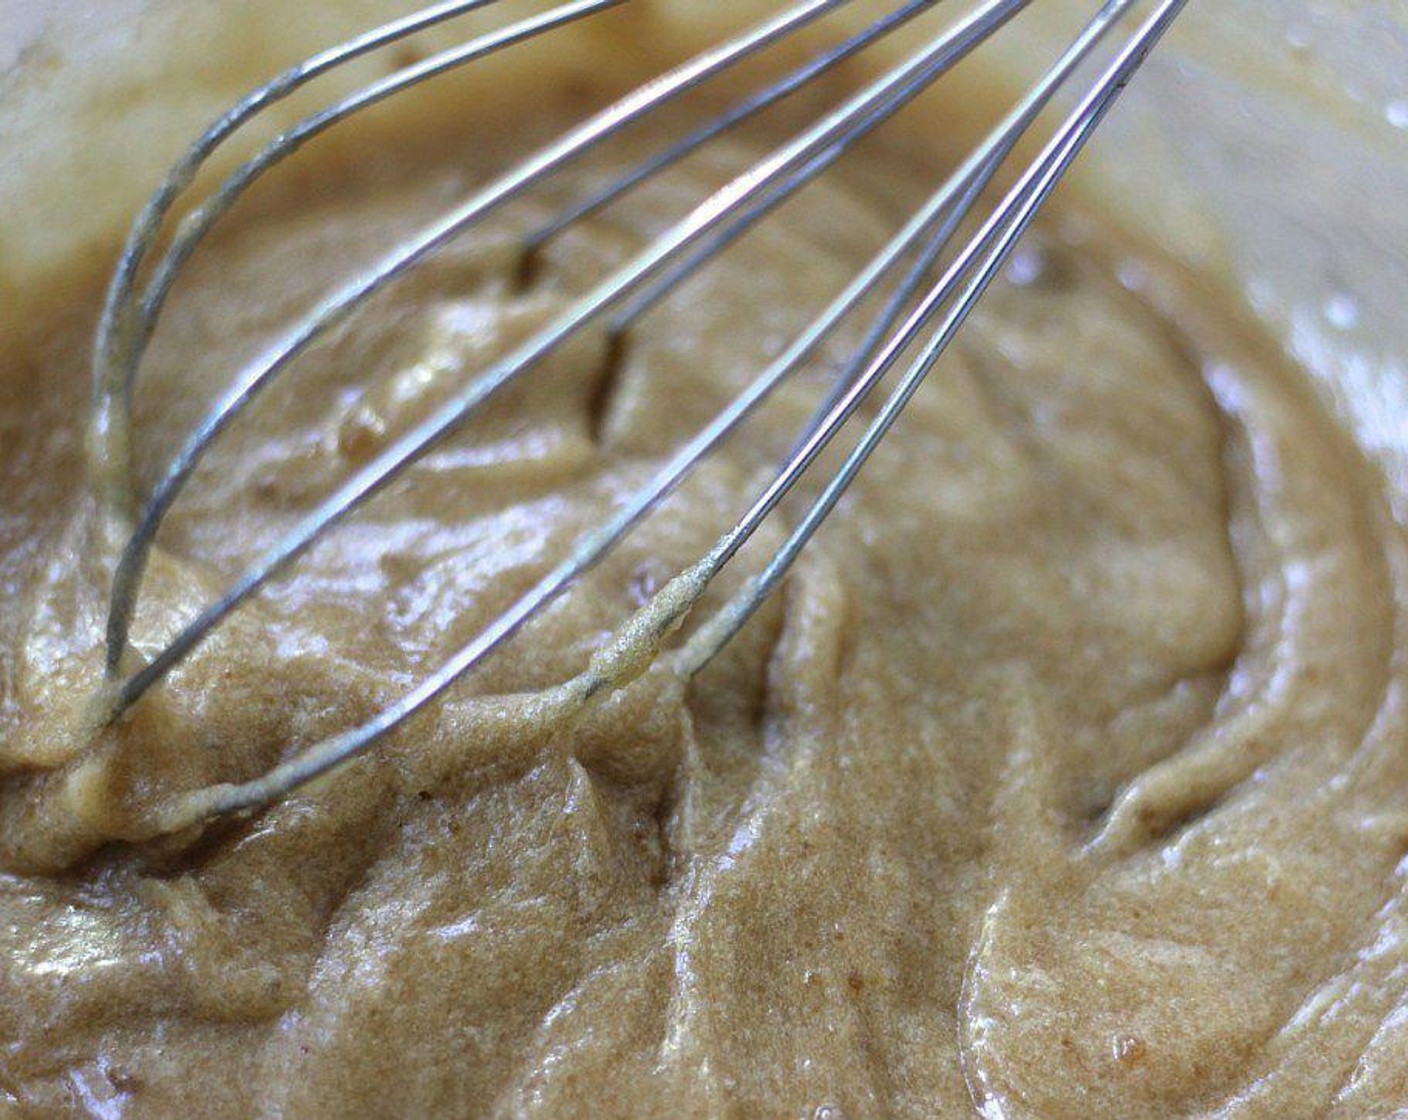 step 2 In a large bowl, whisk together melted Unsalted Butter (1/2 cup), Dark Brown Sugar (3/4 cup), and Granulated Sugar (1/4 cup) until smooth. Add Egg (1) and Clear Imitation Vanilla Extract (1/2 Tbsp), and whisk well.